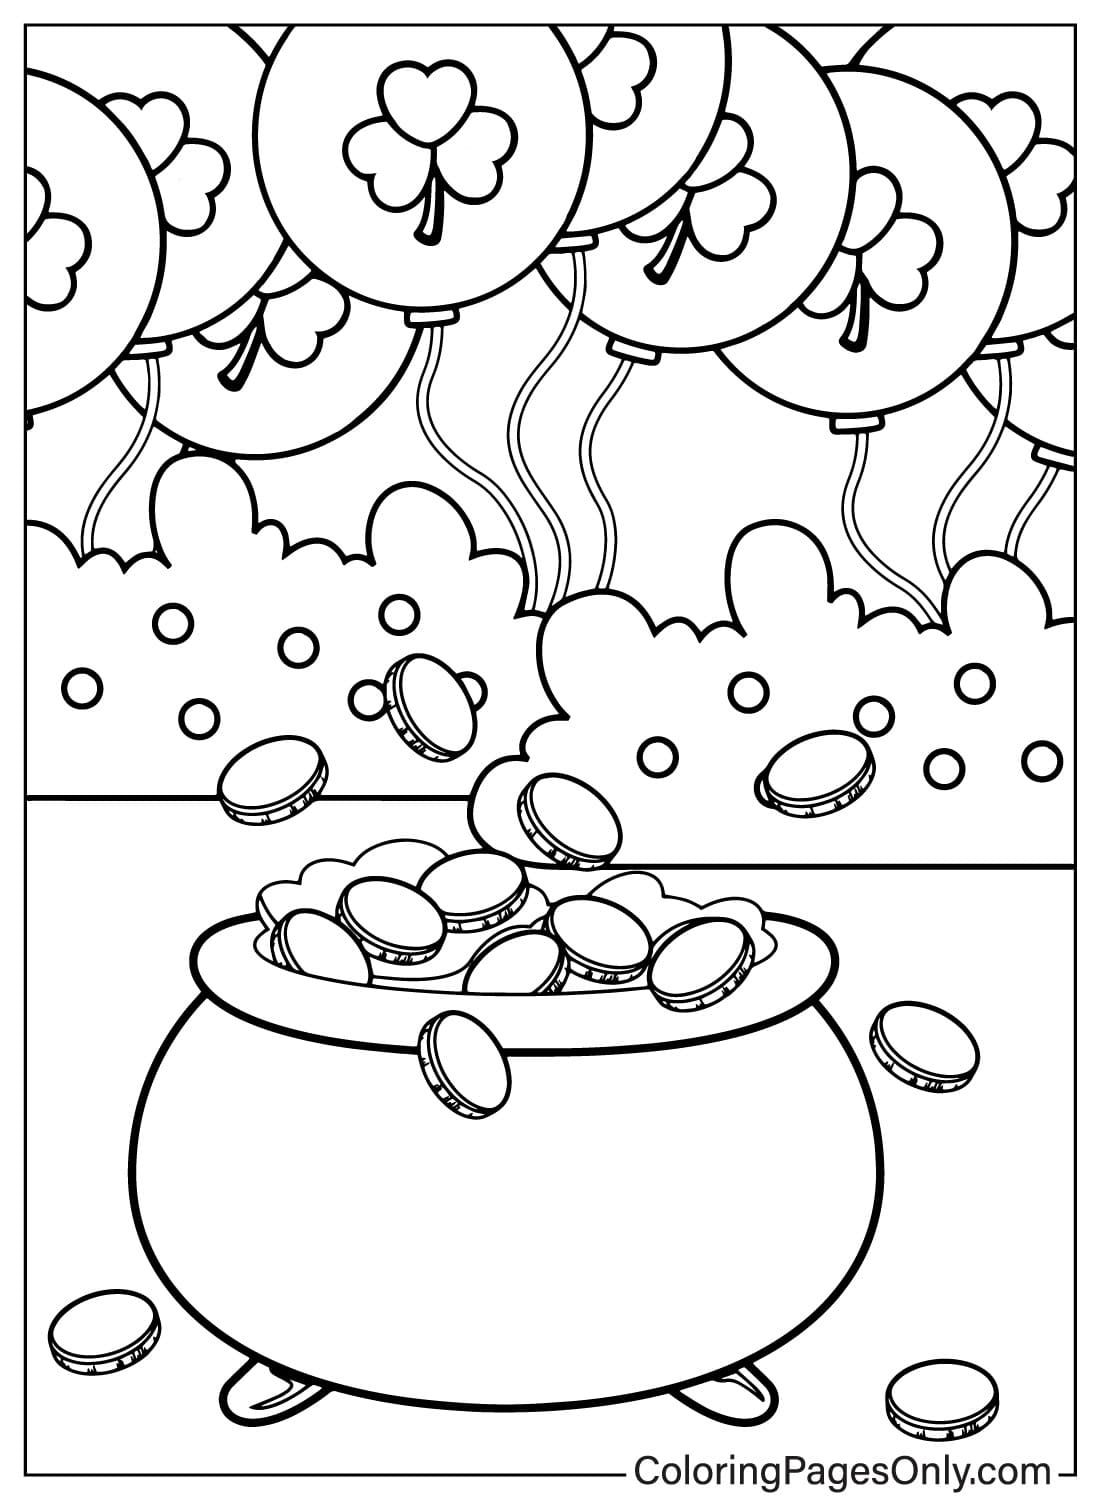 Printable Lucky Charms Coloring Page Free Printable Coloring Pages